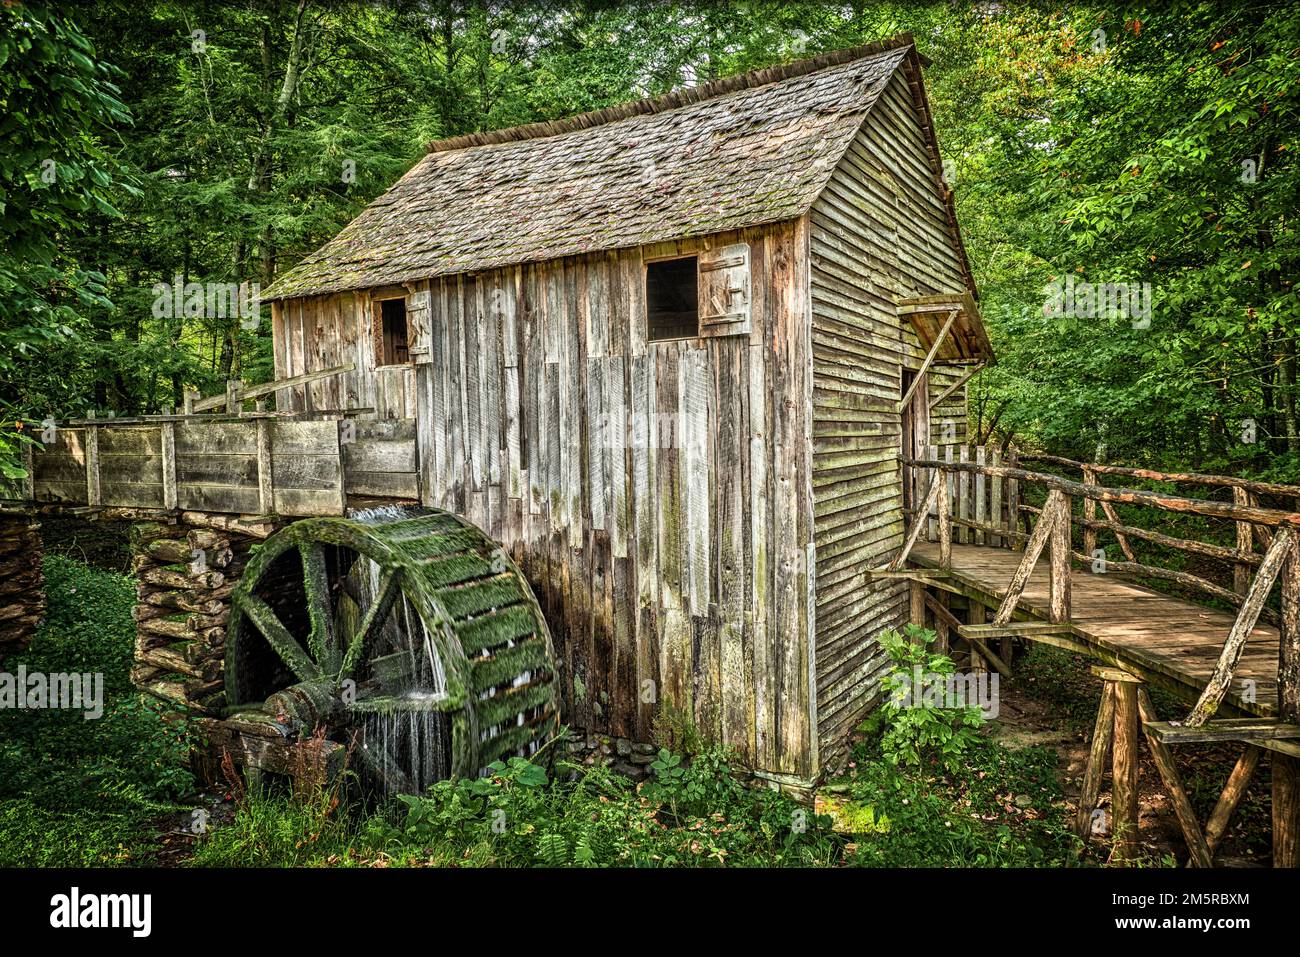 The Cable Grist Mill in the Cades Cove section of the Great Smoky Mountains National Park was constructed in 1867 by John Cable.  It is one of the mos Stock Photo